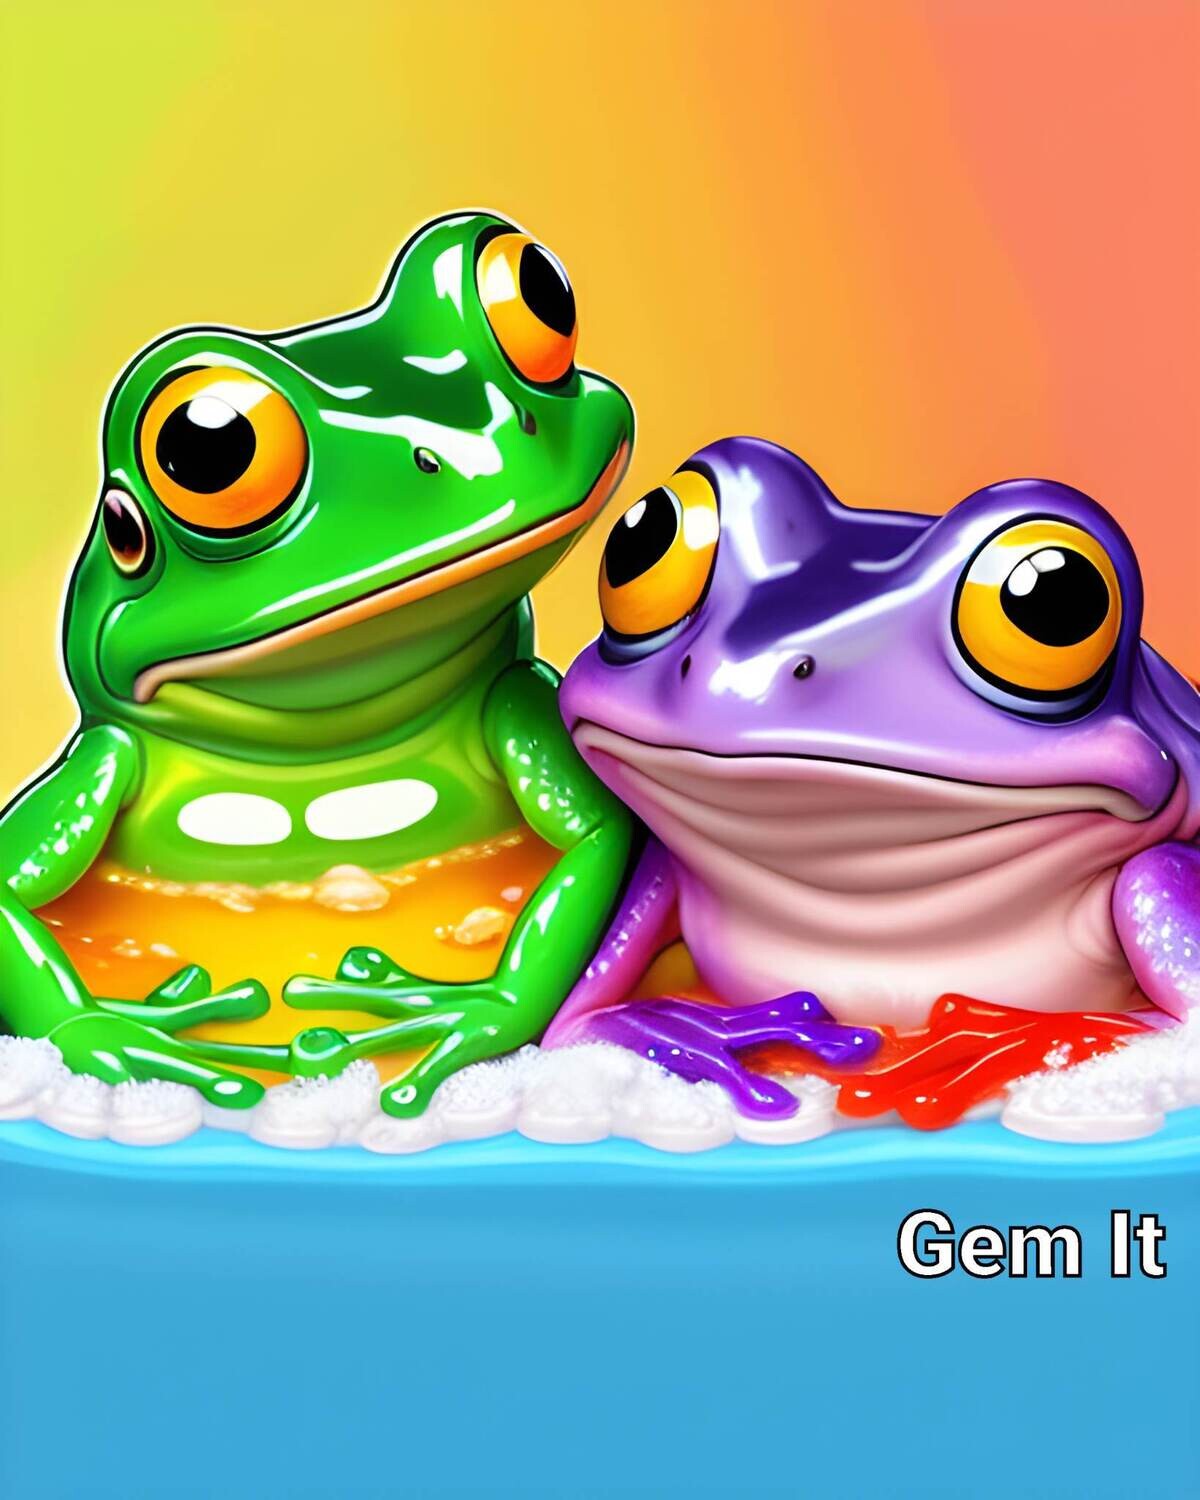 Colourful Frogs in a Bath 2 - Specially ordered for you. Delivery is approximately 4 - 6 weeks.